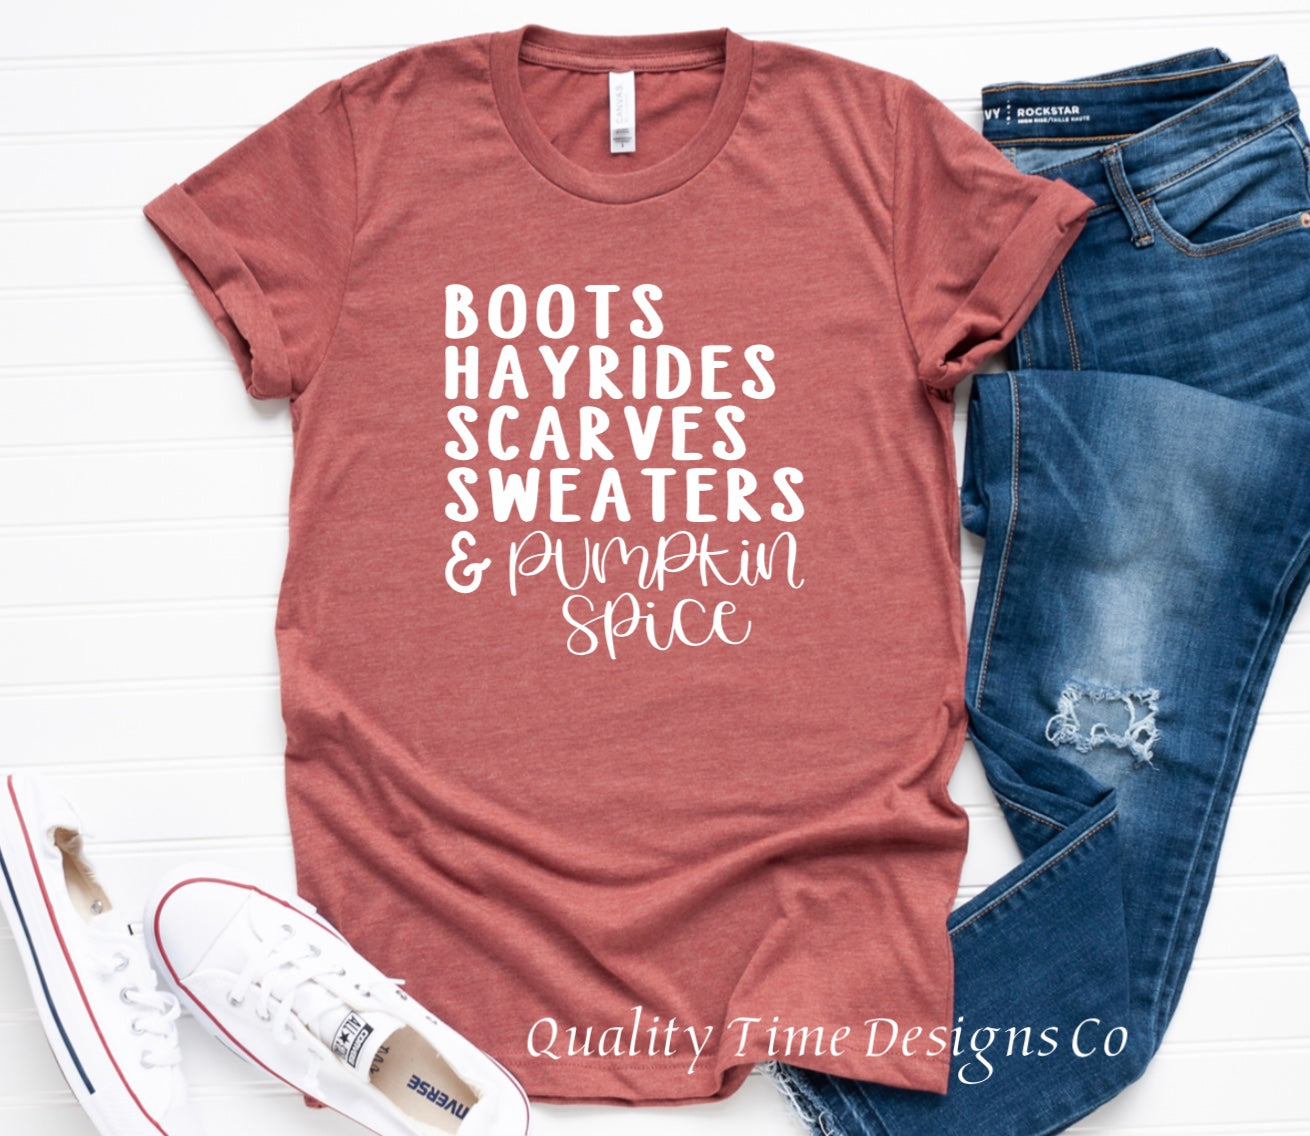 Boots hayrides scarves sweaters and pumpkin spice t-shirt 